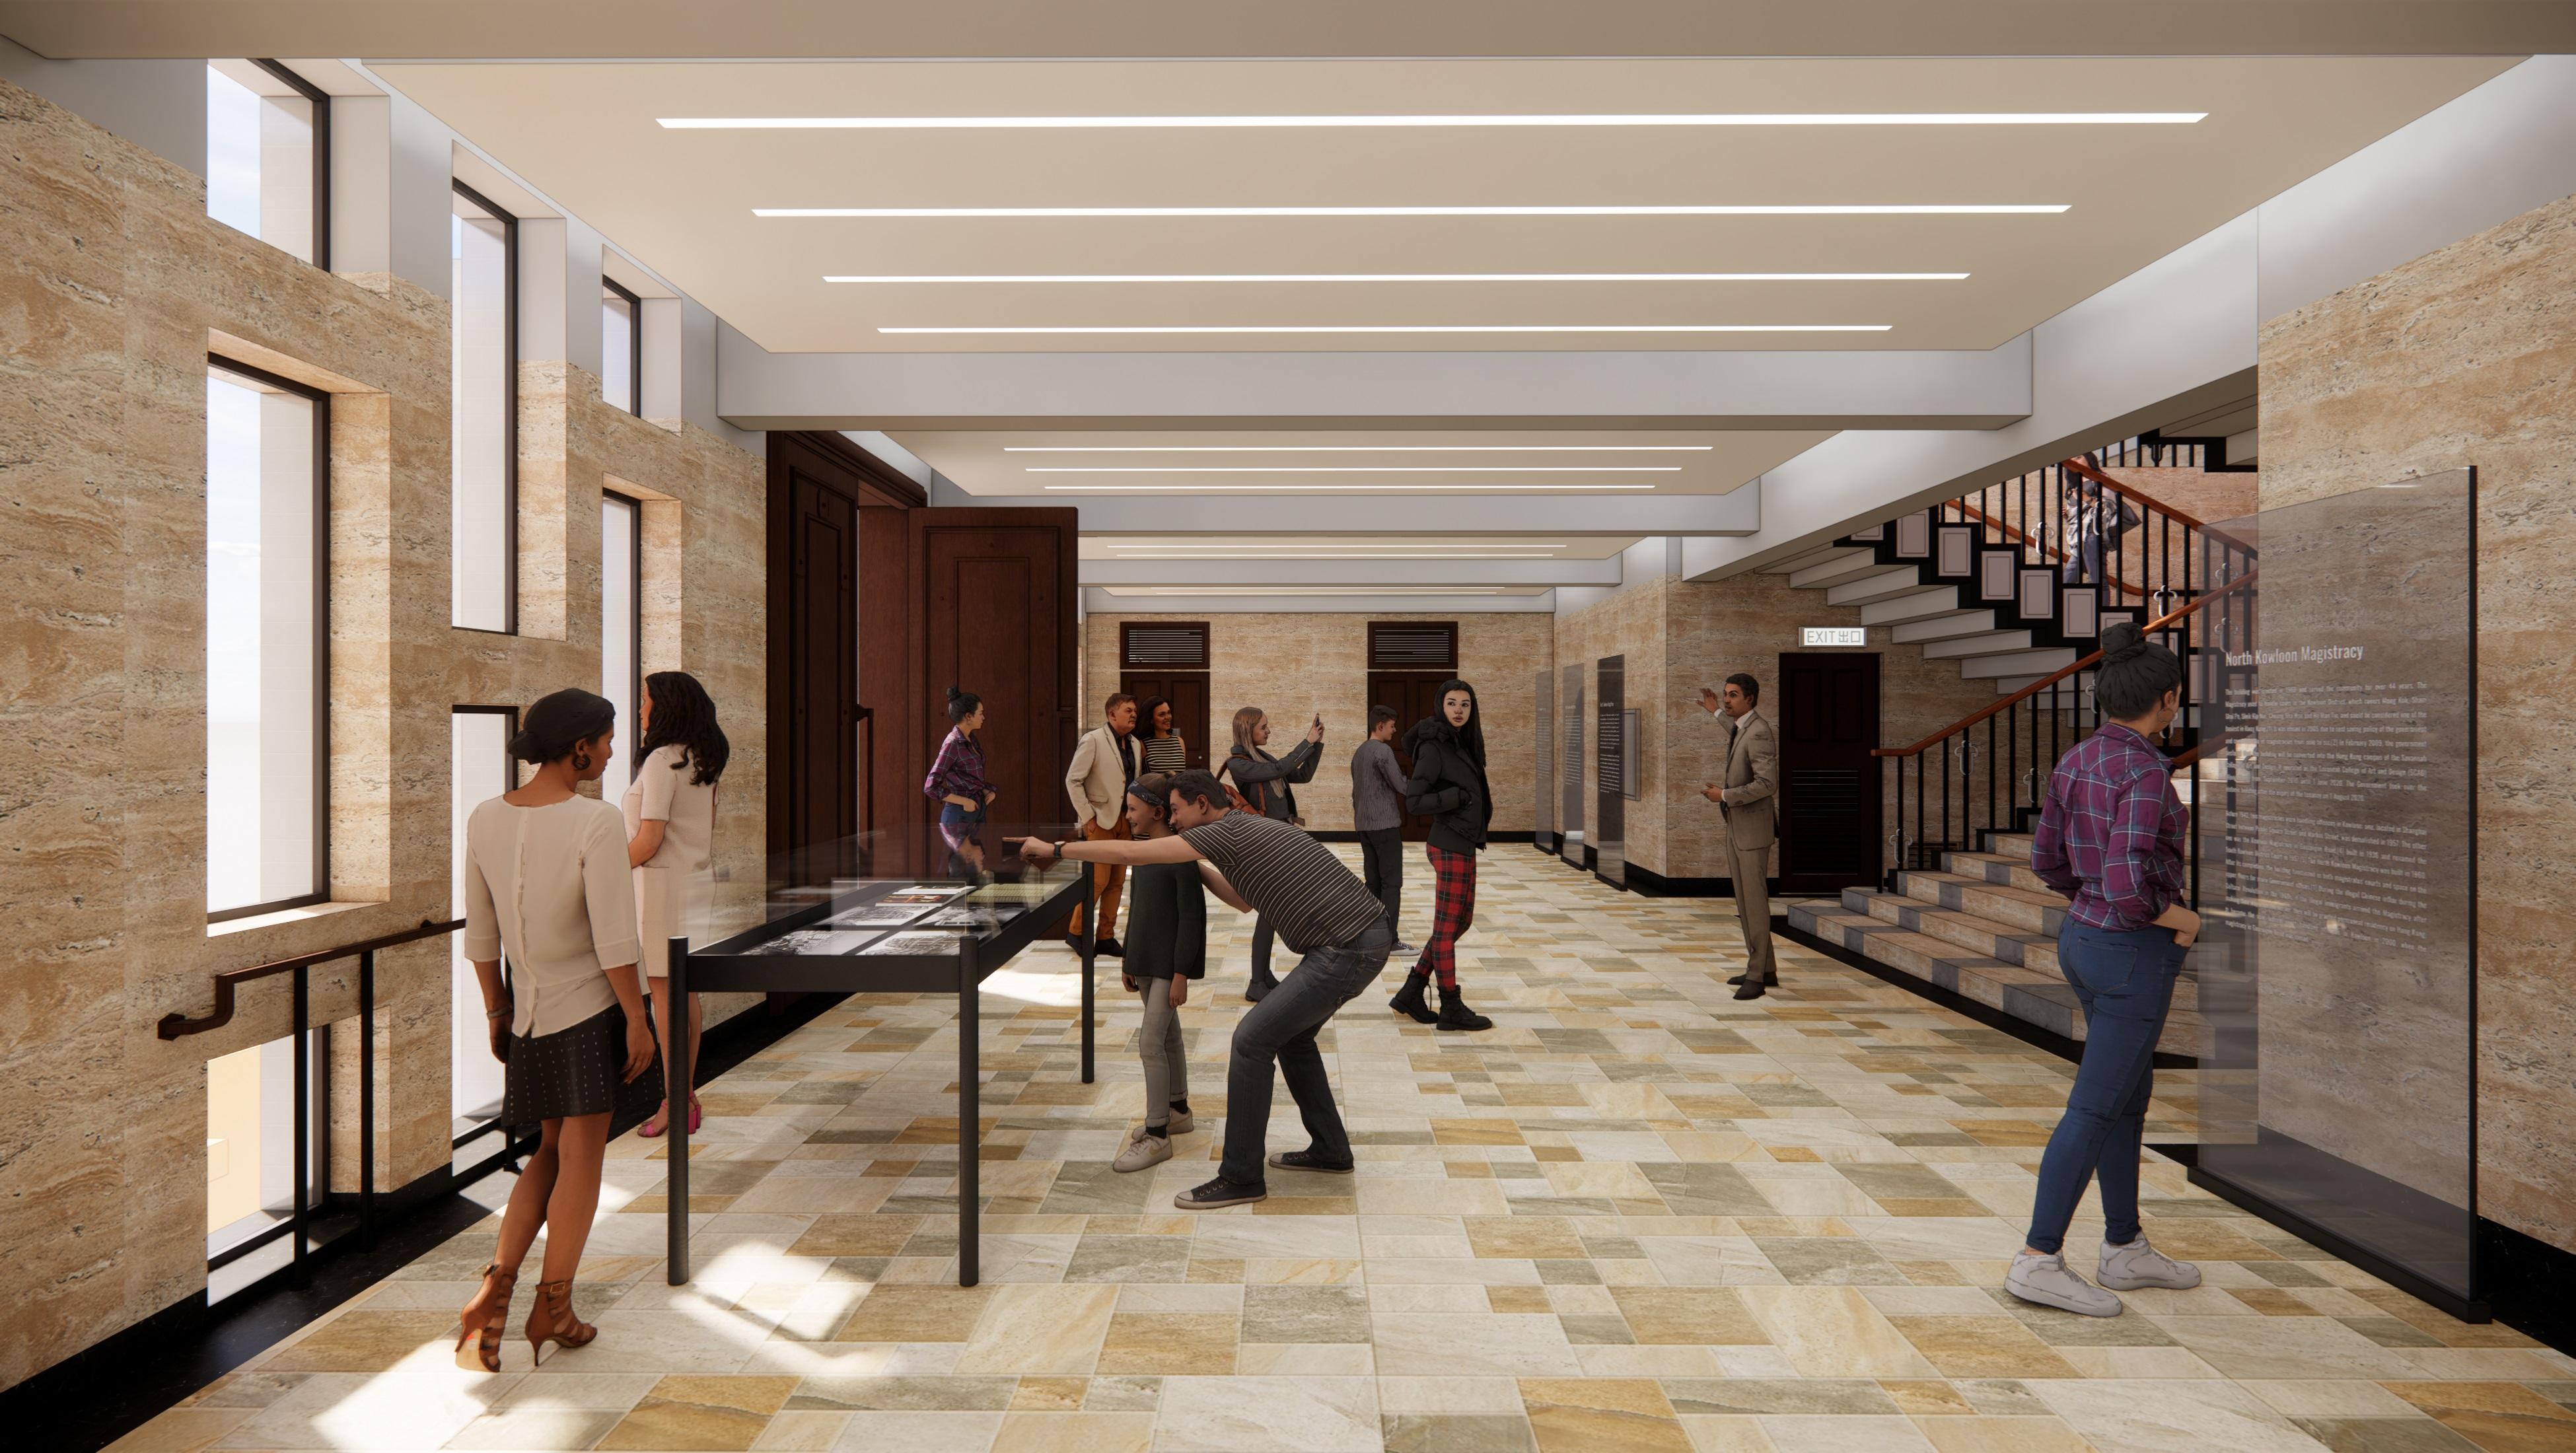 The Development Bureau announced today (December 8) that the project proposed by the Society of Rehabilitation and Crime Prevention, Hong Kong has been selected to revitalise the Former North Kowloon Magistracy under Batch VI of the Revitalising Historic Buildings Through Partnership Scheme. Photo shows a photomontage of the exhibition hall, after revitalisation of the Magistracy's hall area.